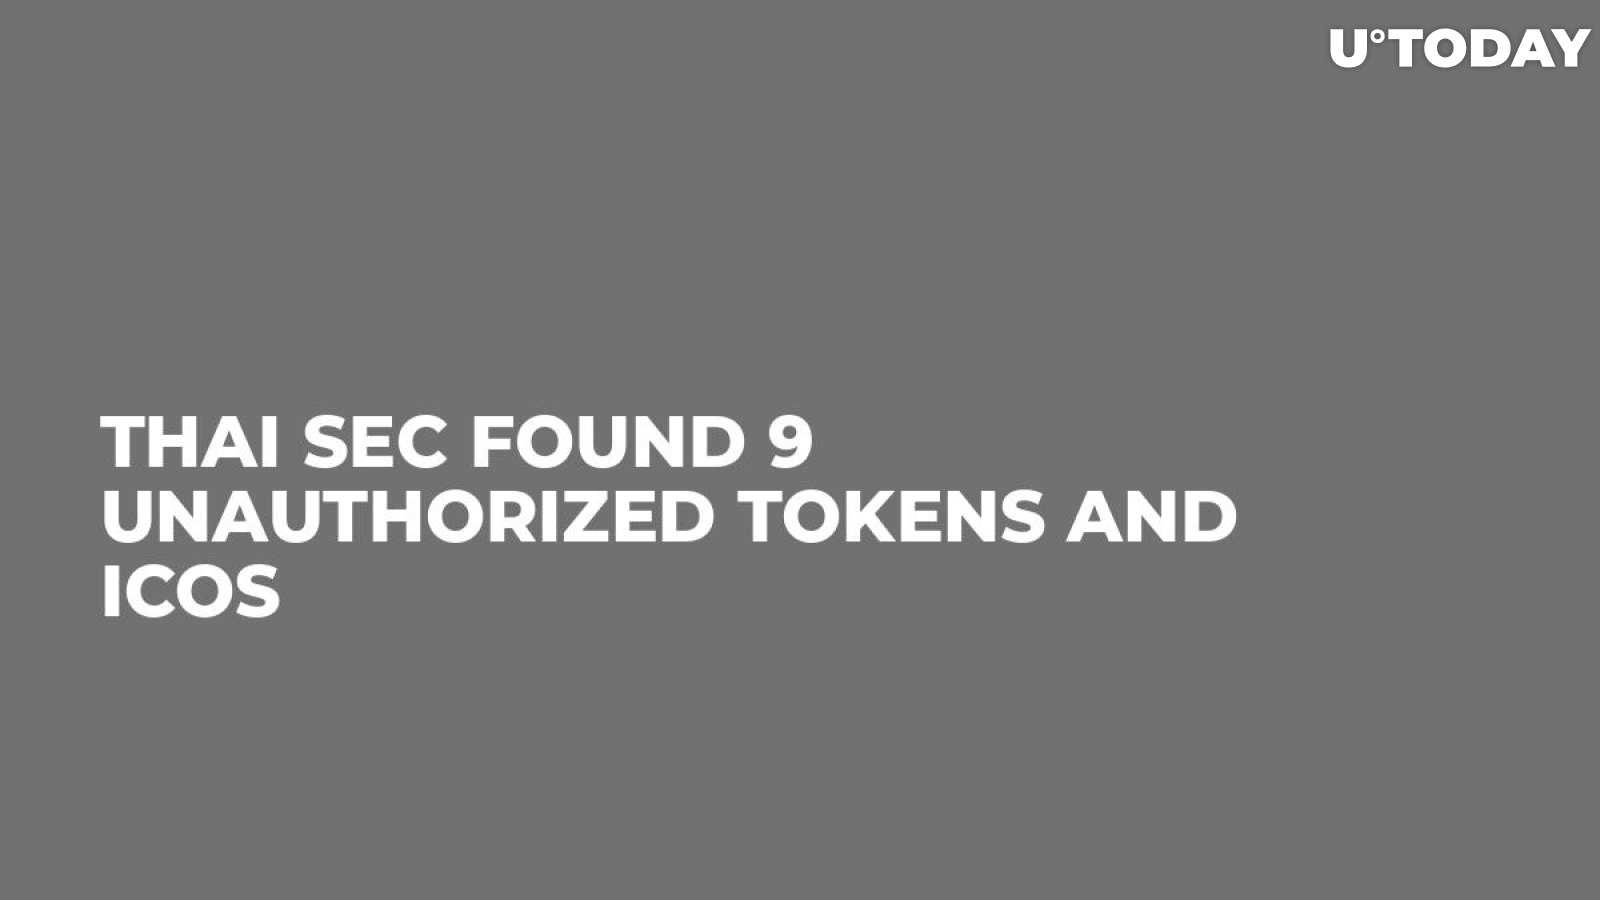 Thai SEC Found 9 Unauthorized Tokens and ICOs